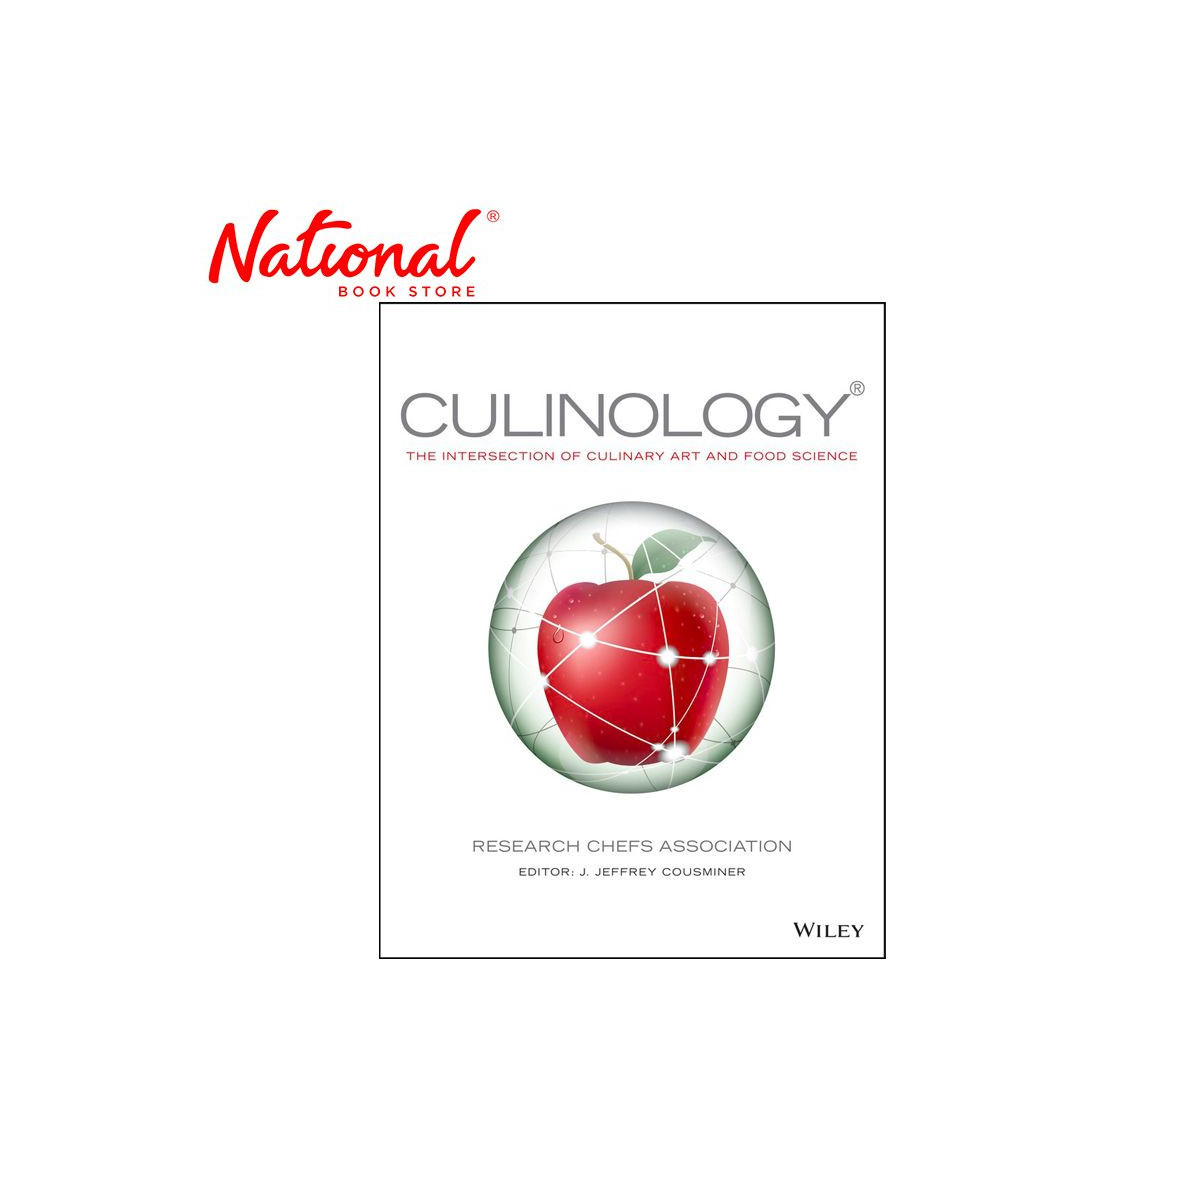 Culinology: The Intersection of Culinary Art & Food Science by Research Chefs Association - Cookbook